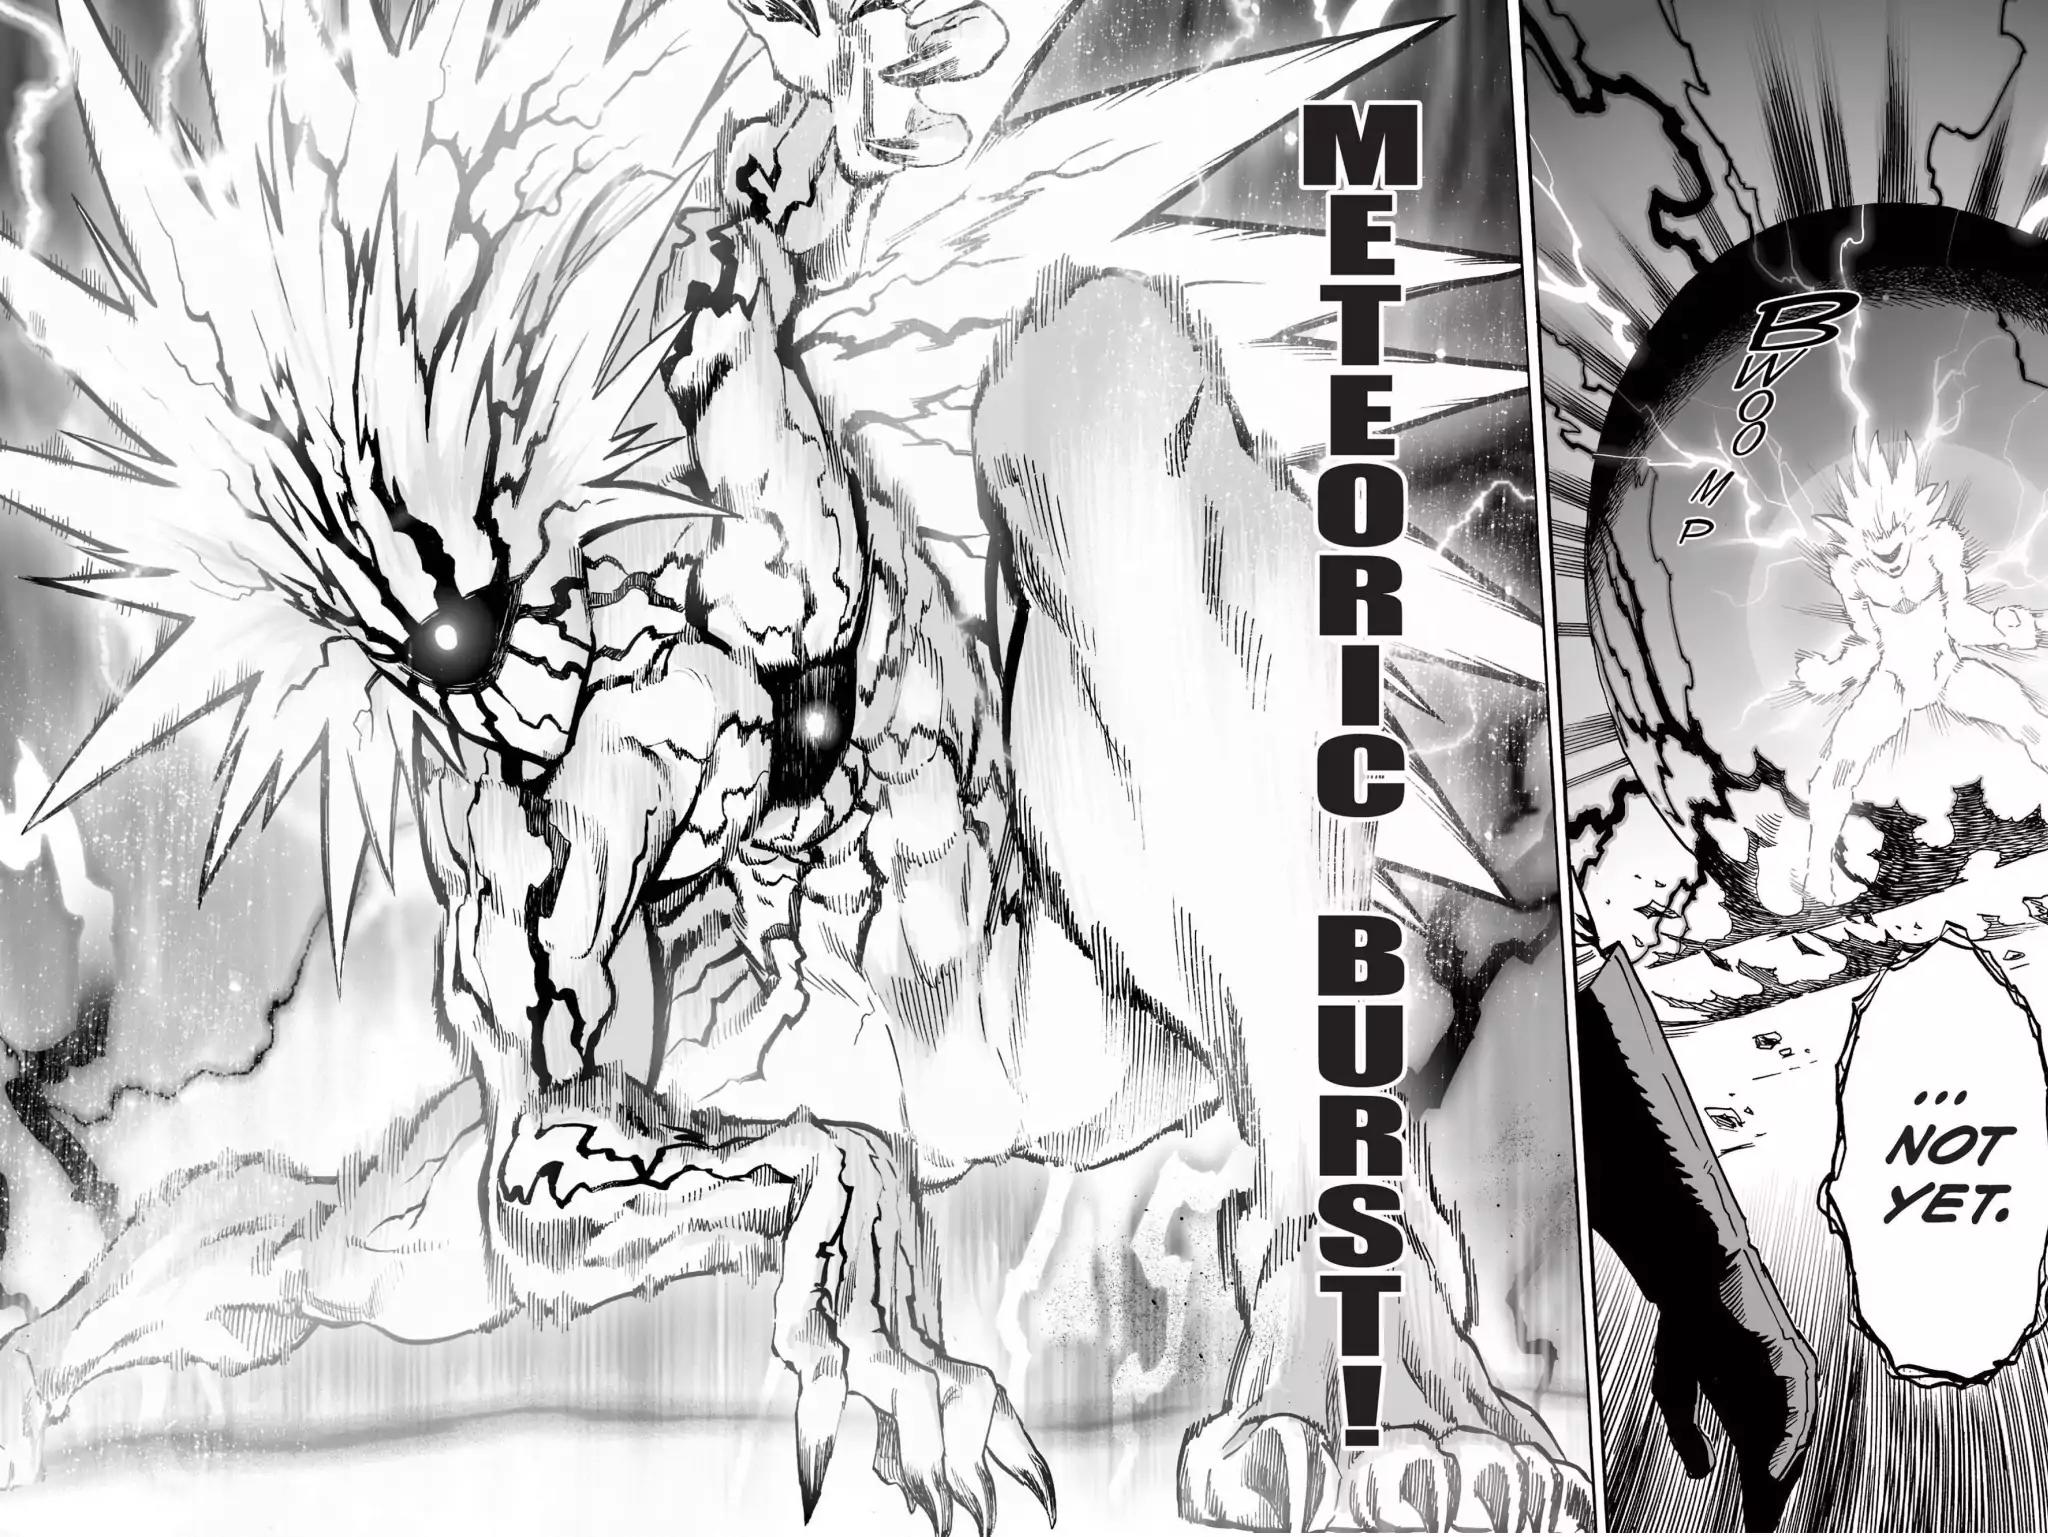 One Punch Man, Chapter 36 Boros